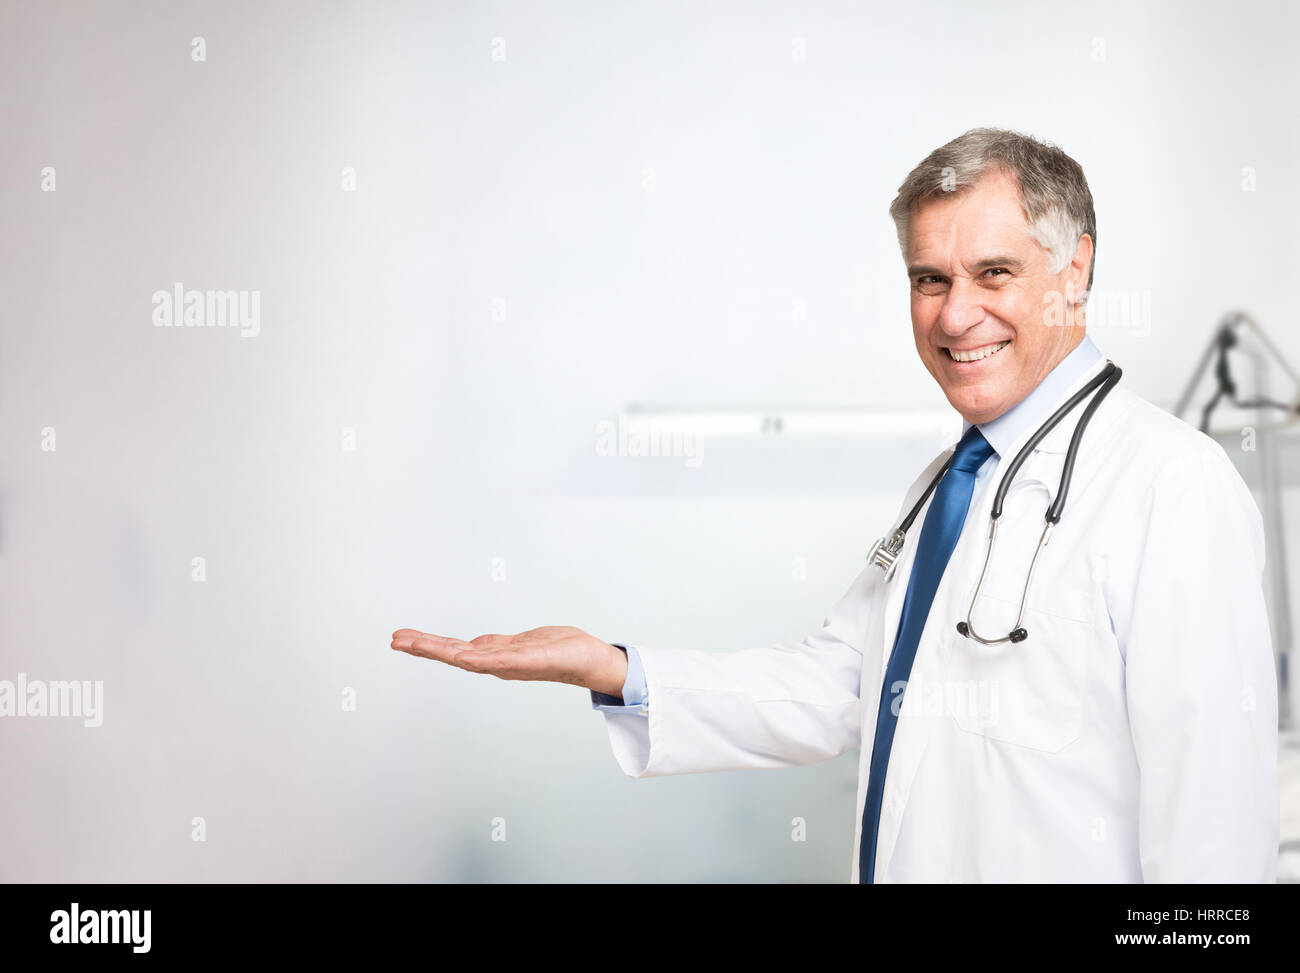 Senior doctor presenting and showing copy space for product or text Stock Photo